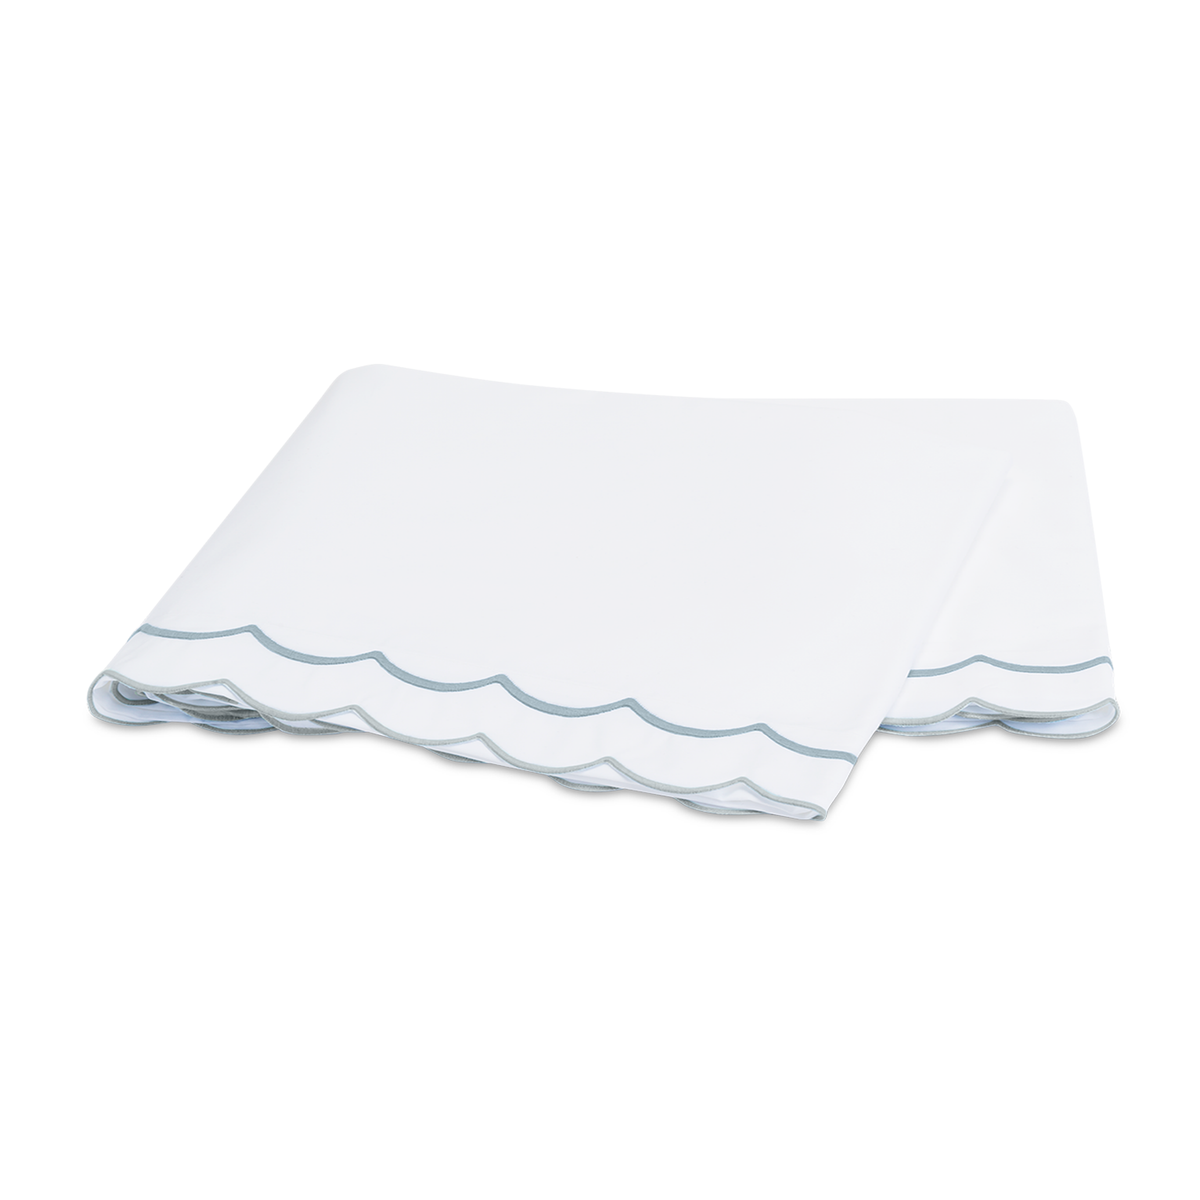 Flat Sheet of Matouk India Bedding in Pool Color